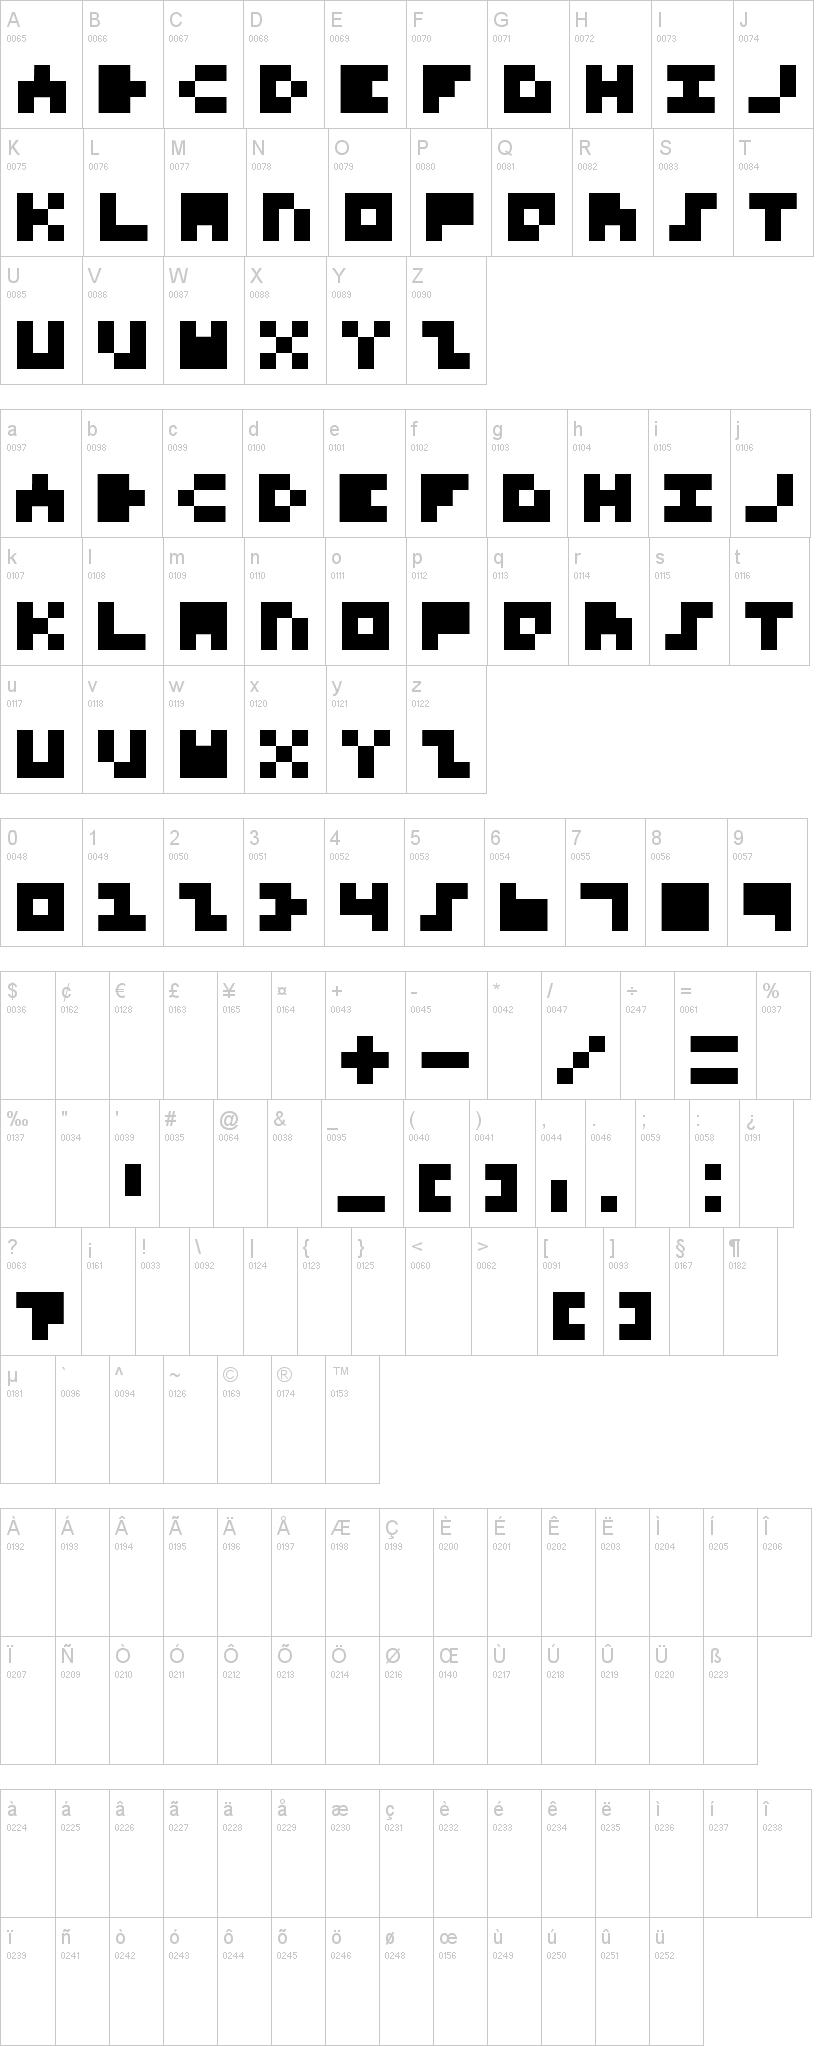 3x3 Font for Nerds